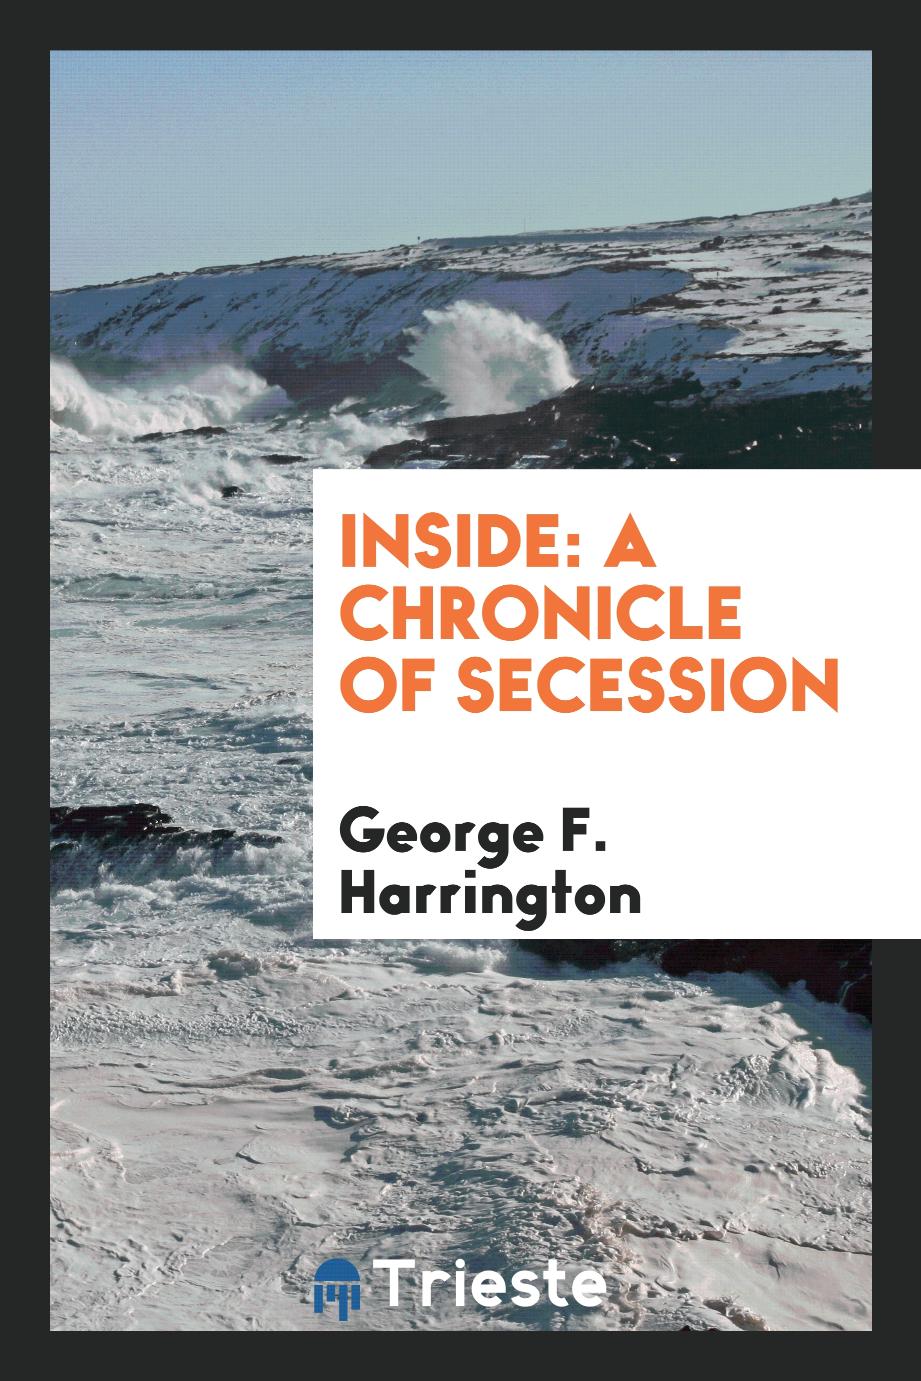 Inside: a chronicle of secession